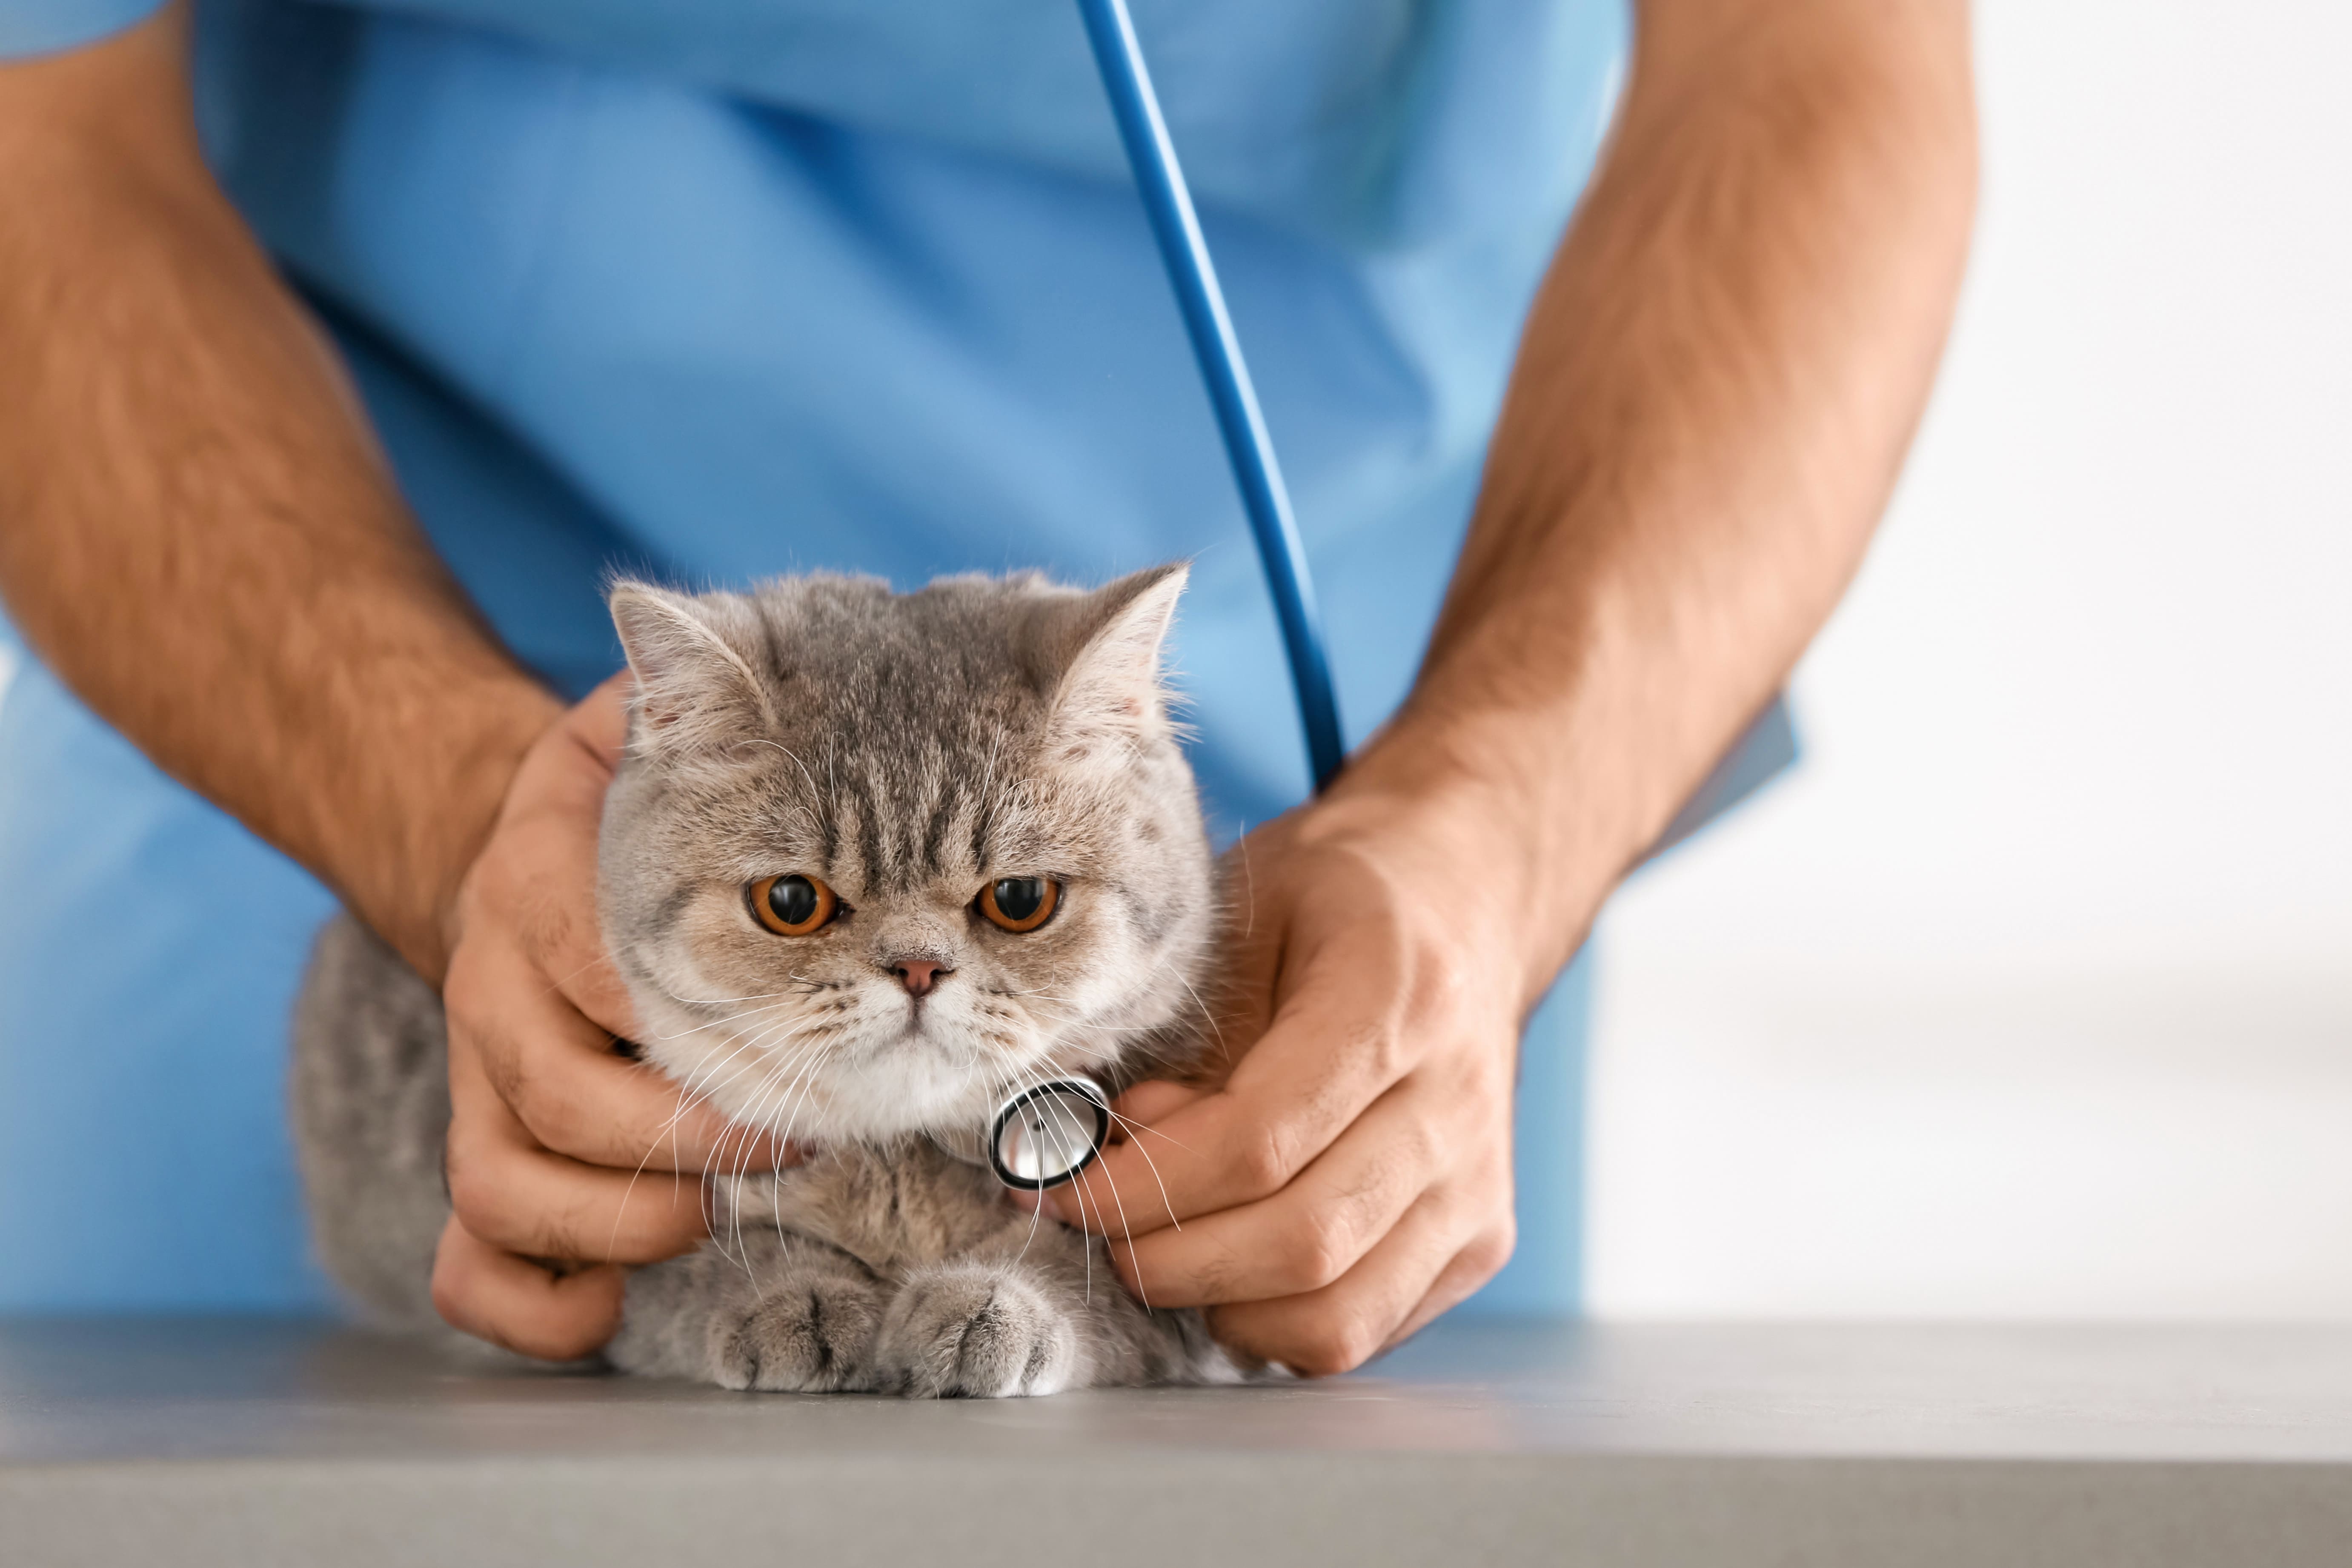 There is a broad range of academic programs in veterinary for people of all educational levels.